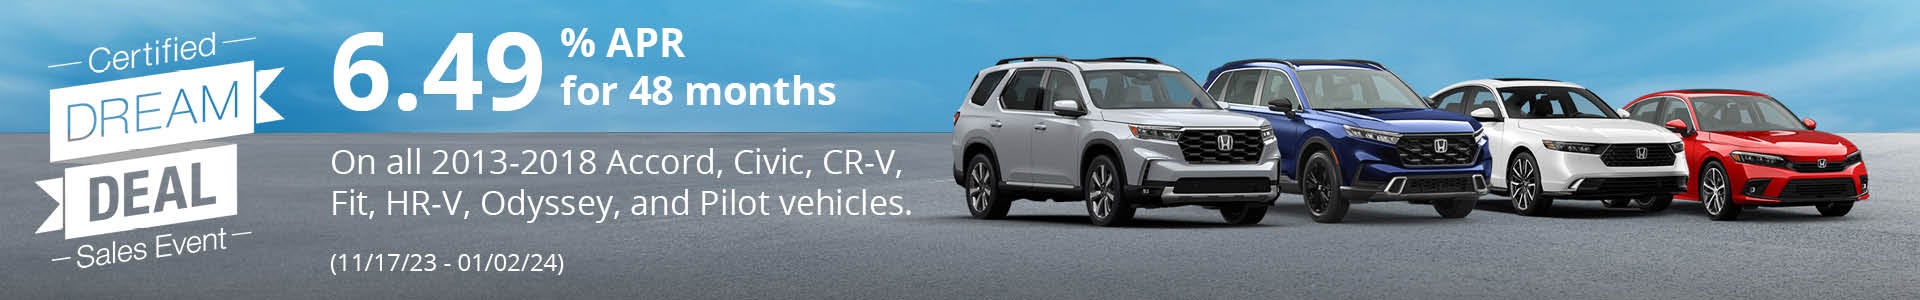 6.49% APR up to 48 months on all 2013-2018 Accord, Civic, CR-V, Fit, HR-V, Odyssey, and Pilot vehicles. 11/17/23 - 01/02/24